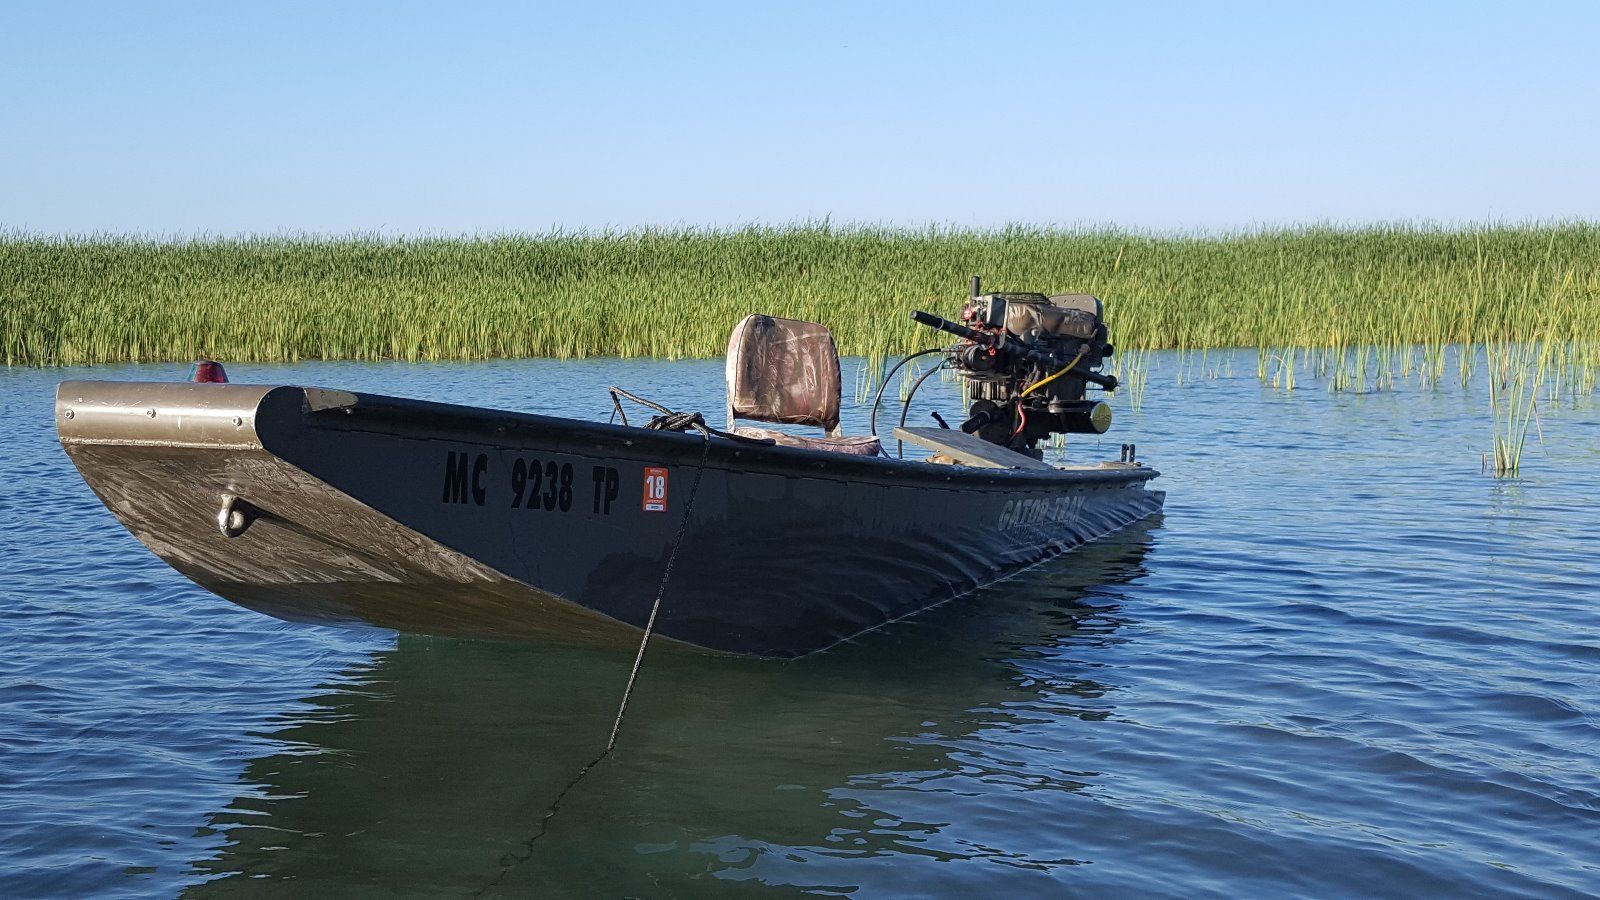 gator trax boats for sale